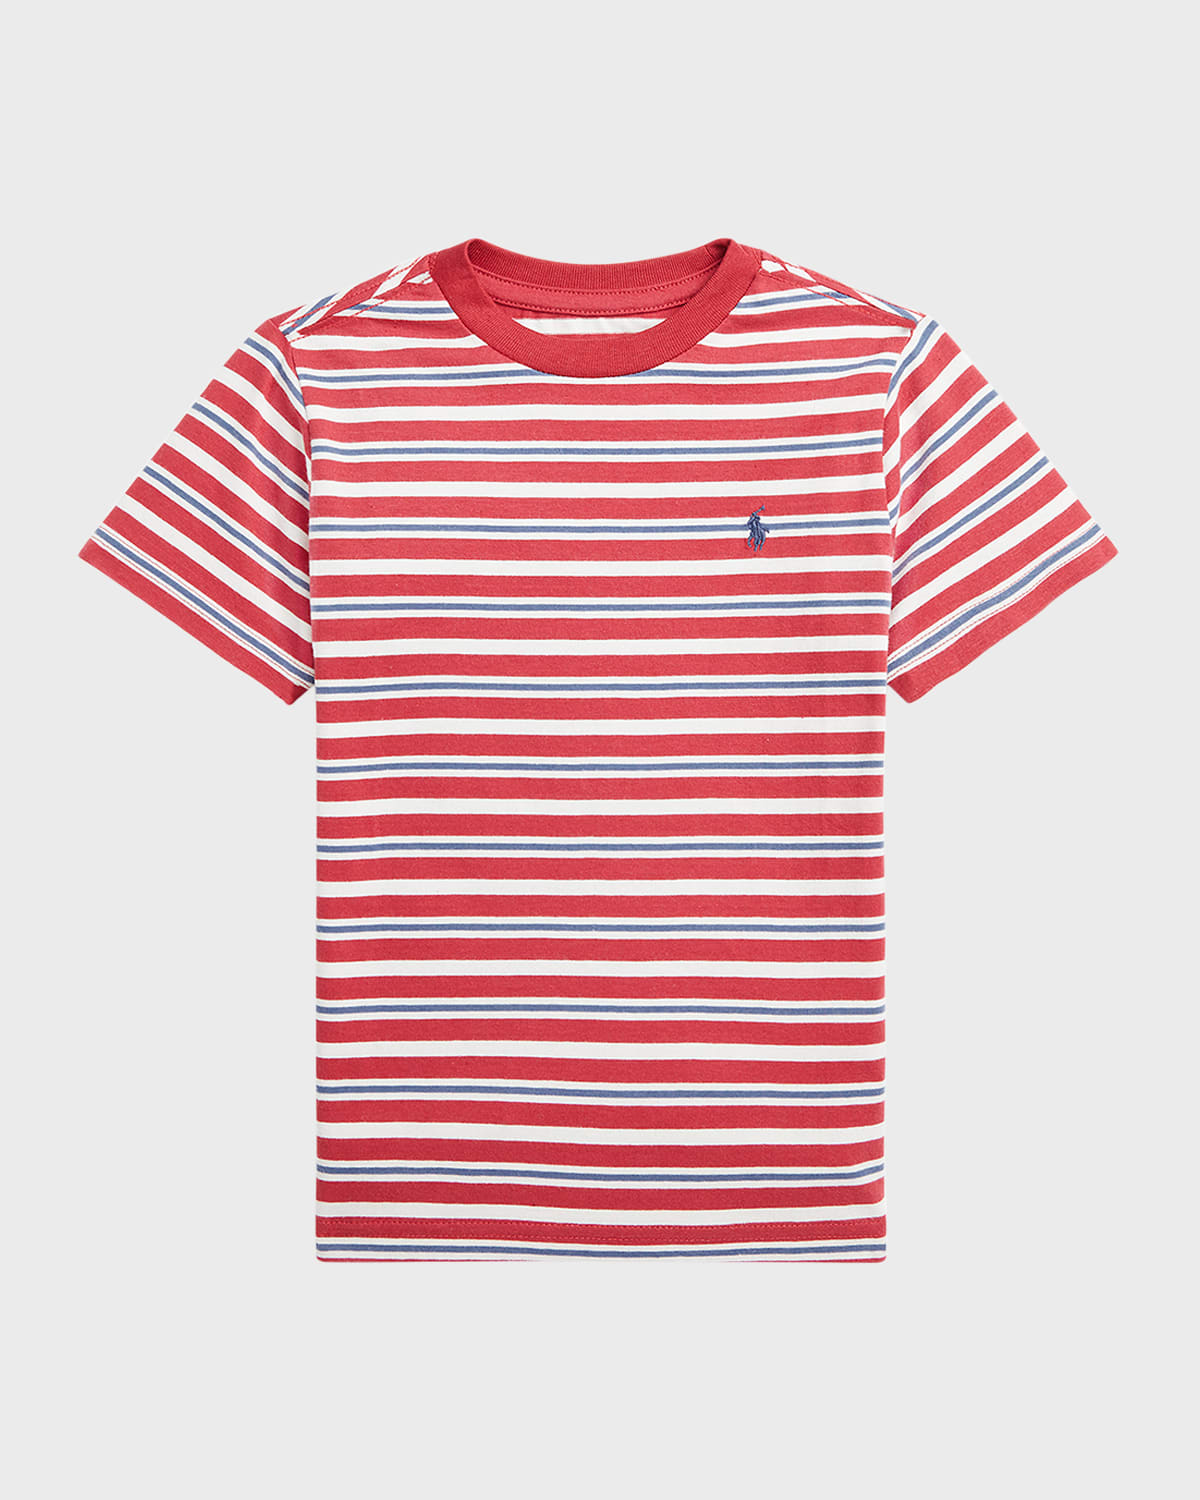 Boy's Striped Embroidered Pony T-Shirt, Size 4-7